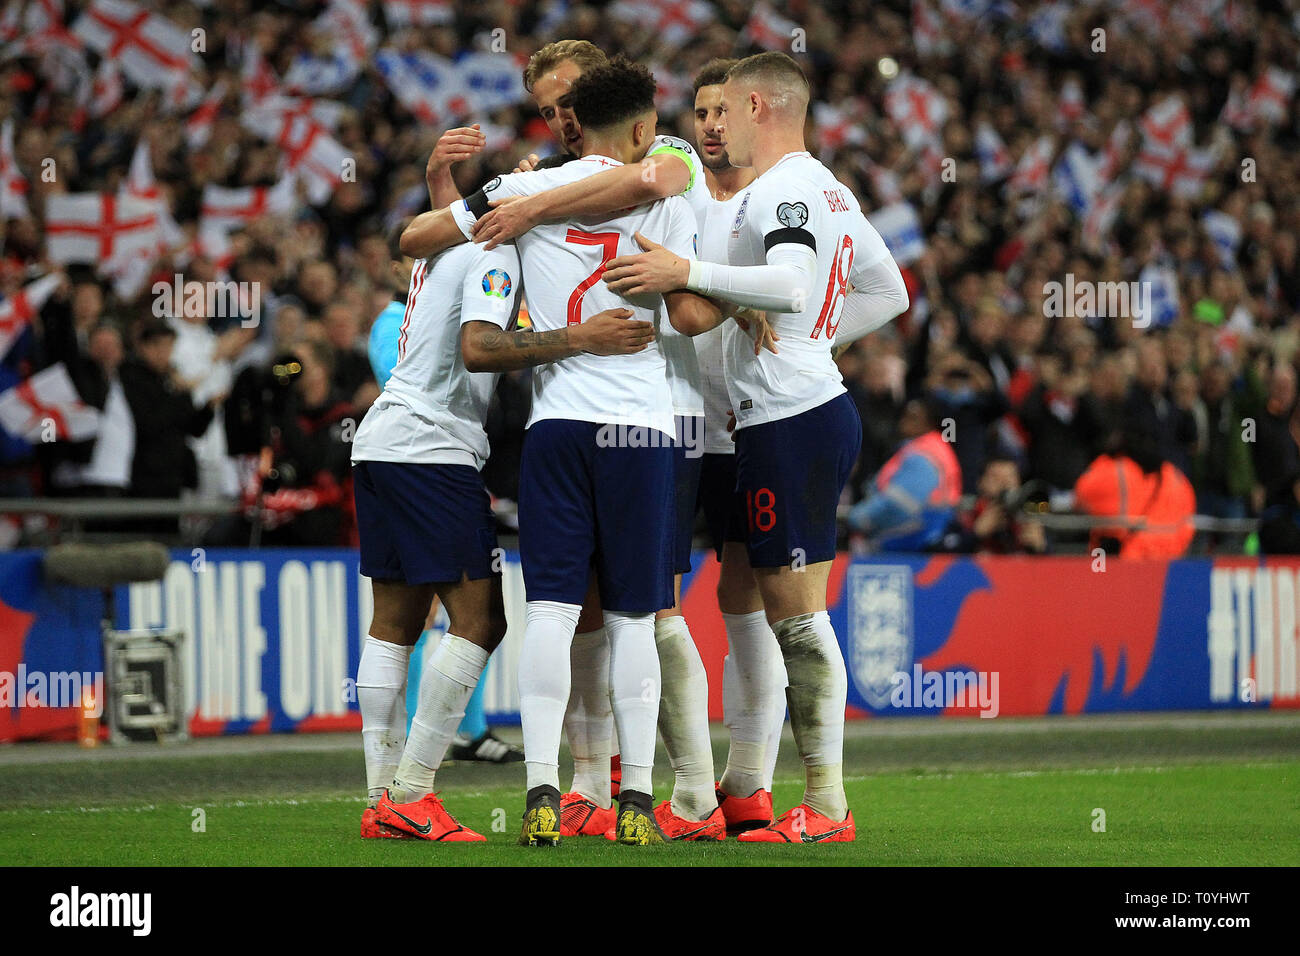 London, UK. 22nd Mar, 2019. Raheem Sterling of England celebrates with teammates after scoring his team's third goal. UEFA Euro 2020 qualifier, group A match, England v Czech Republic at Wembley Stadium in London on Friday 22nd March 2019. Please note images are for Editorial Use Only. EDITORIAL USE ONLY. pic by Steffan Bowen/Andrew Orchard sports photography/Alamy Live news Credit: Andrew Orchard sports photography/Alamy Live News Stock Photo